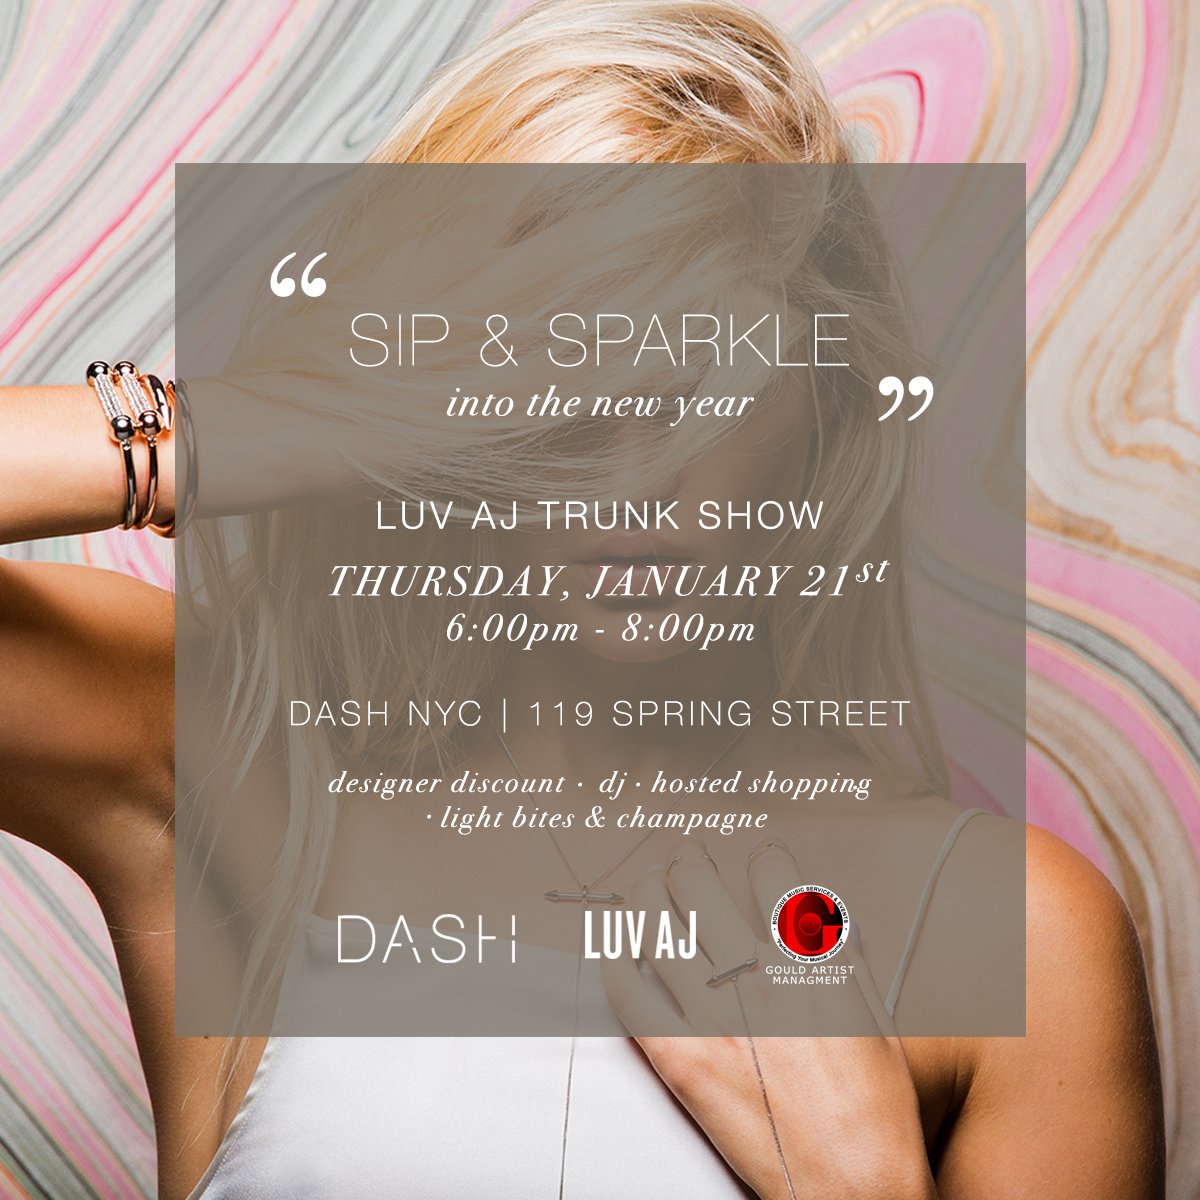 Head to @DASHBoutique in NYC tomorrow night for champagne + shopping. https://t.co/n00vs7rKAB